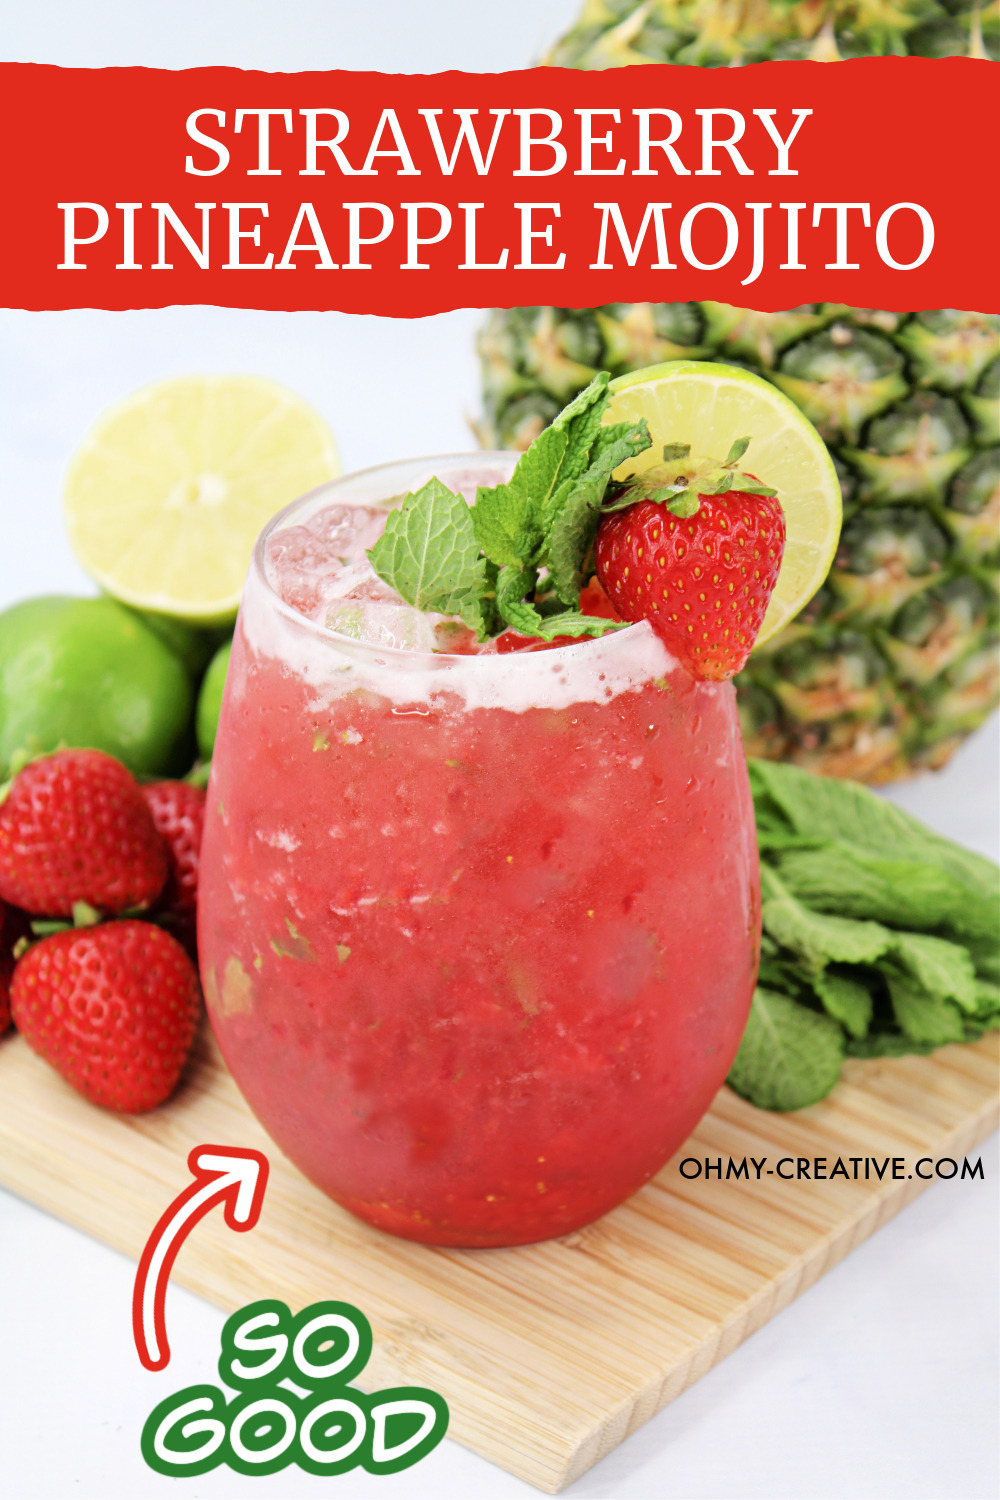 This Strawberry Pineapple Mojito cocktail is garnished with strawberry and mint. It is sitting on a wooden cutting board surrounded by strawberries, limes and a whole pineapple.